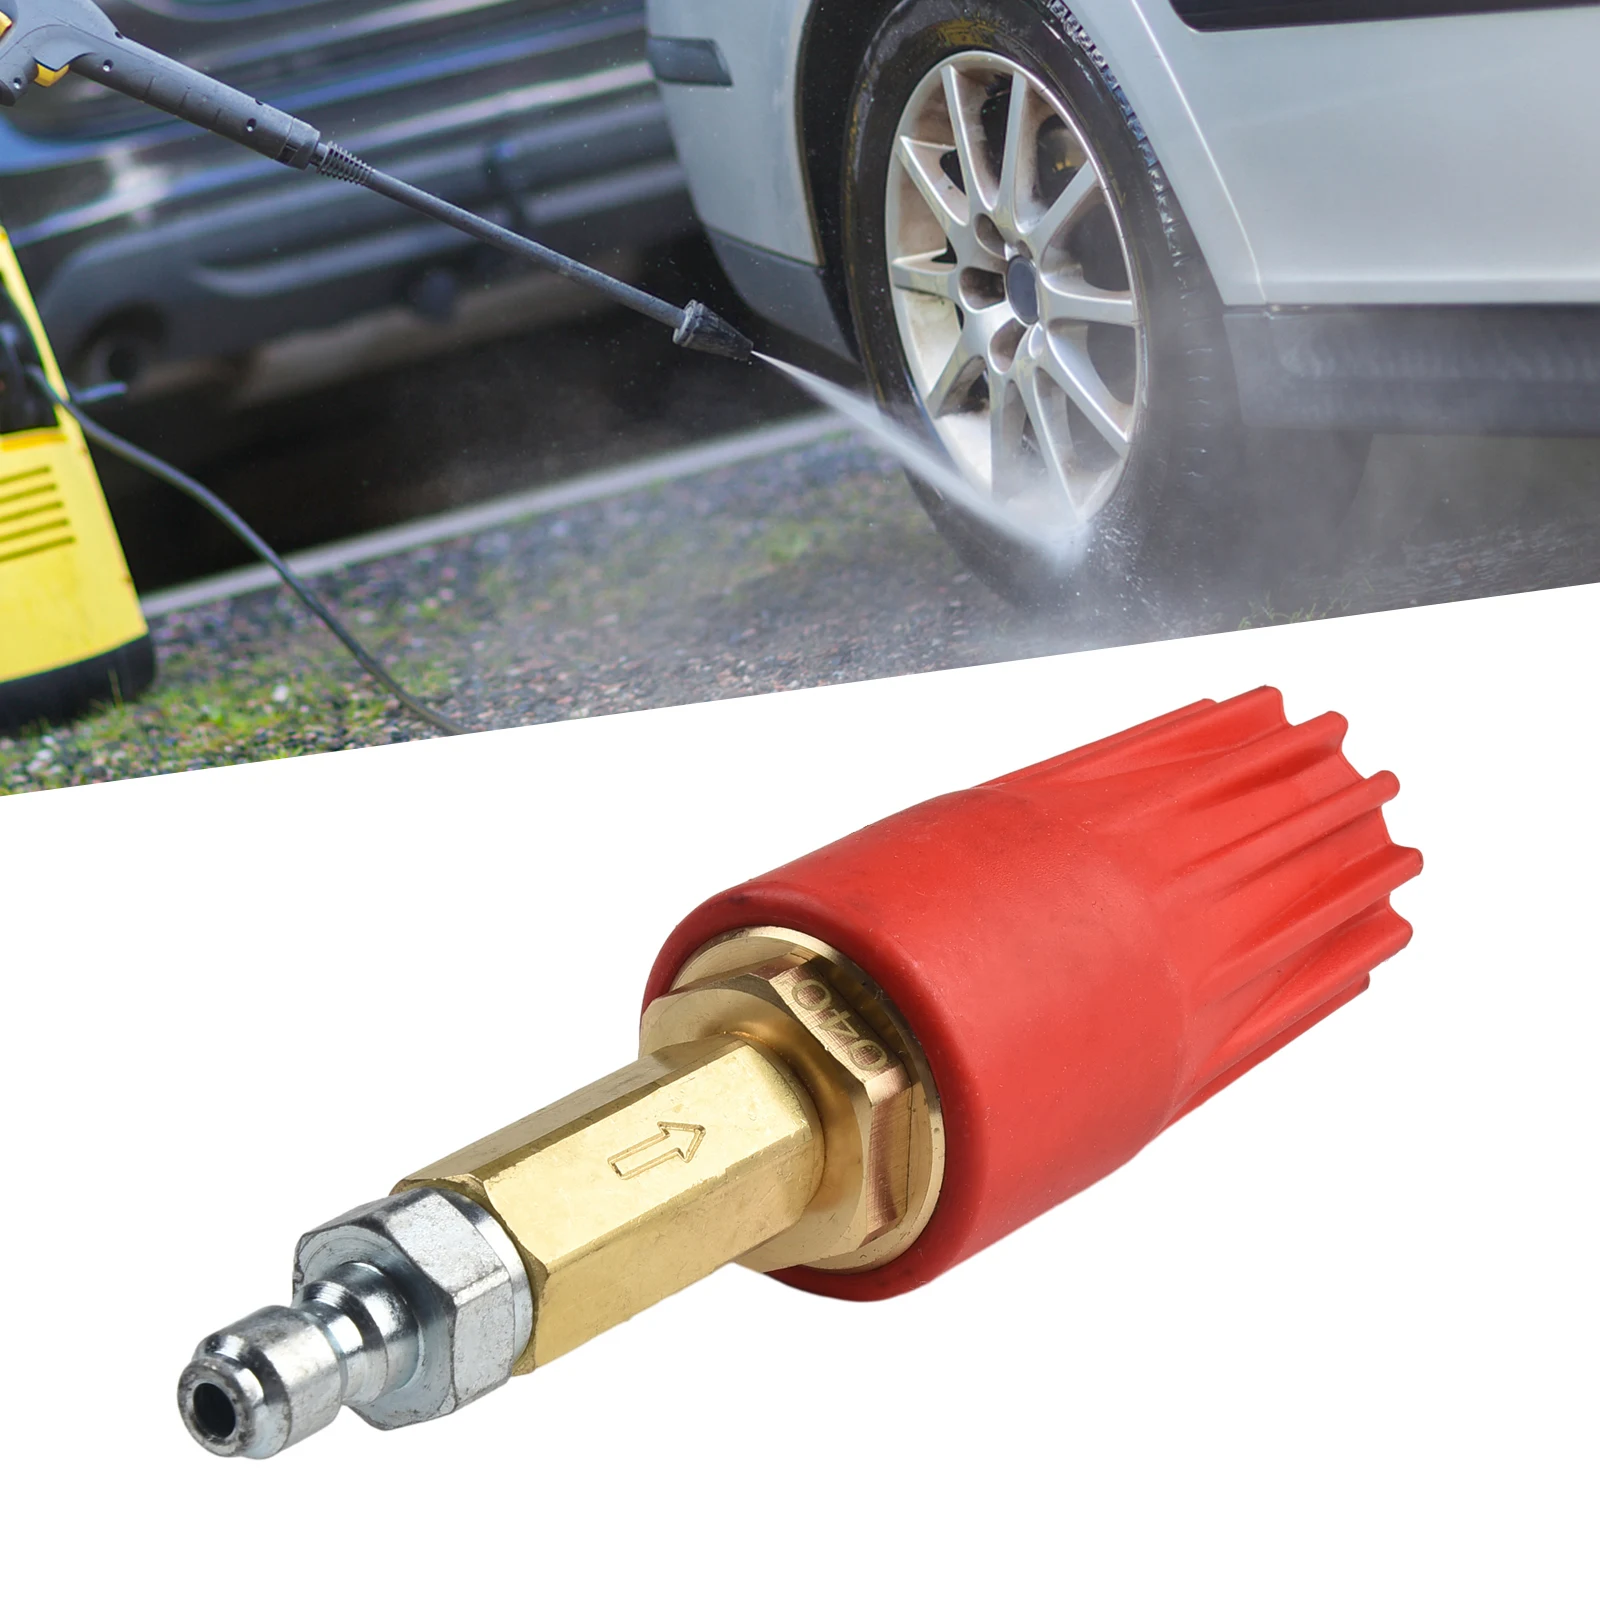 

Pressure Washer Rotating Nozzle 1/4 Male Quick Connect Water Flow Cleaning Cleaning Power Dirt Pressure Washer Red Water Pattern